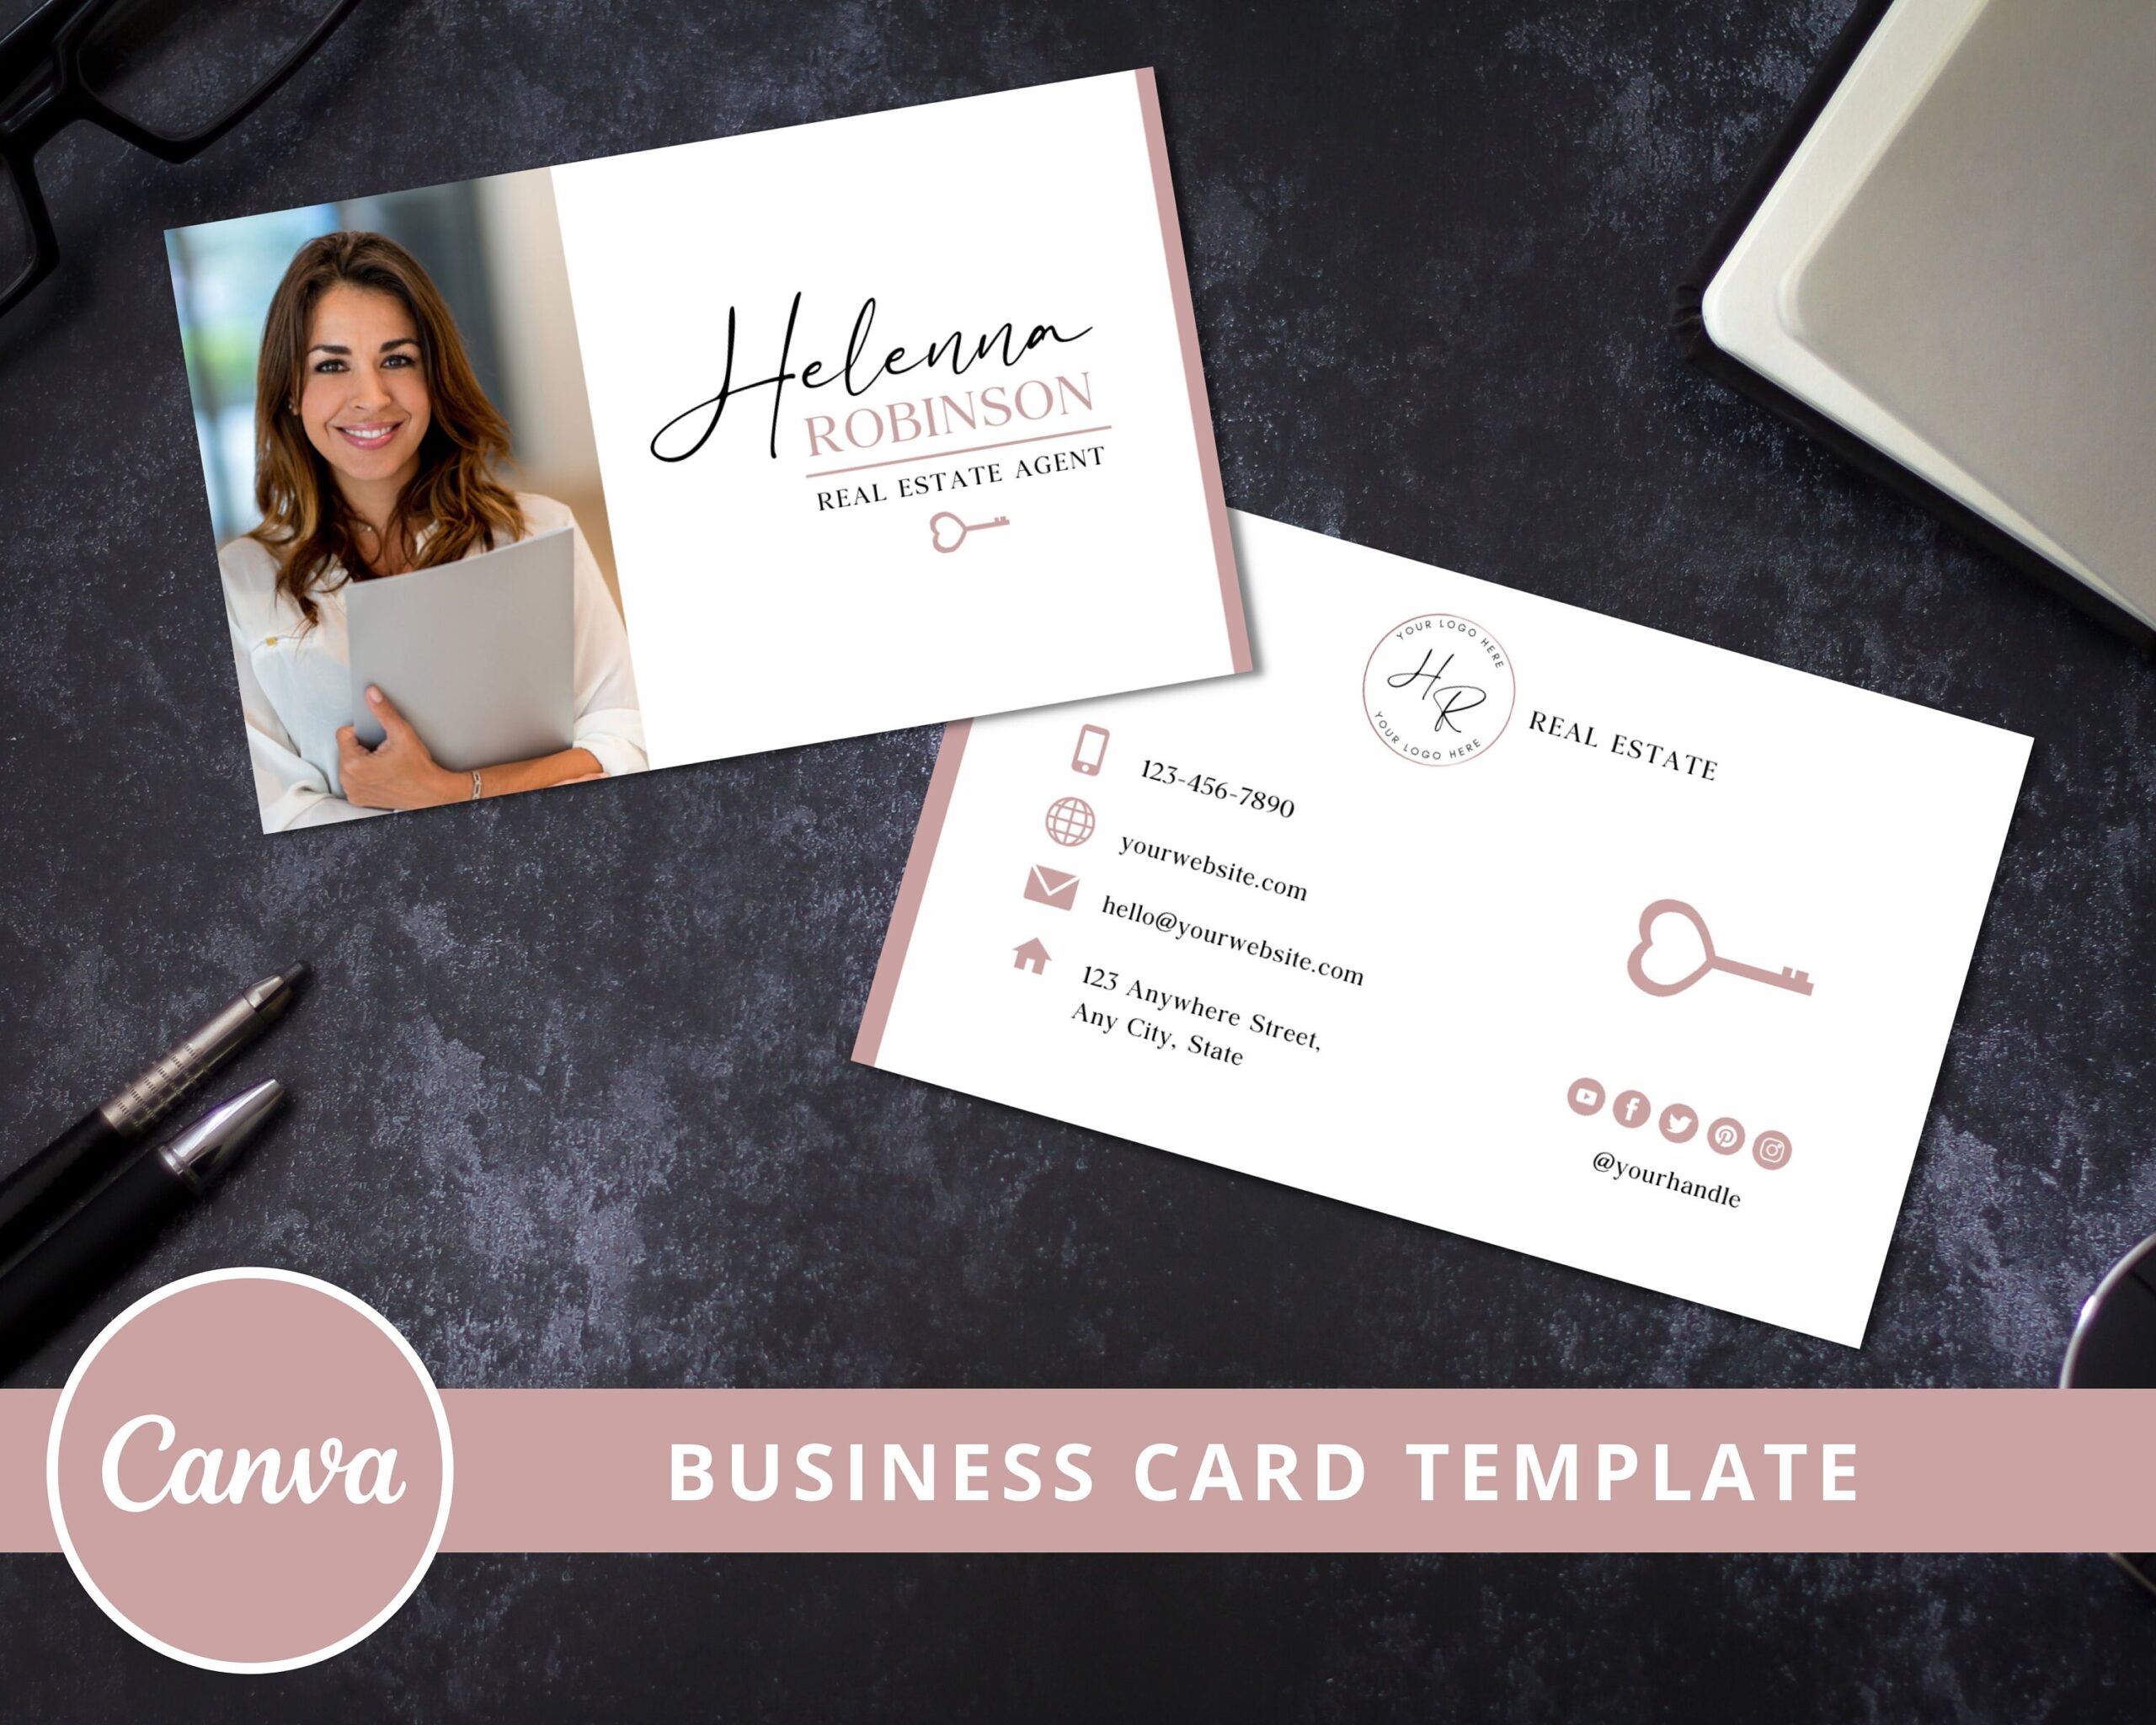 Real Estate Business Card Template for Property Agents - Canva Template, Fully Editable, Double Sided Realtor, Print-Ready - Instant Access